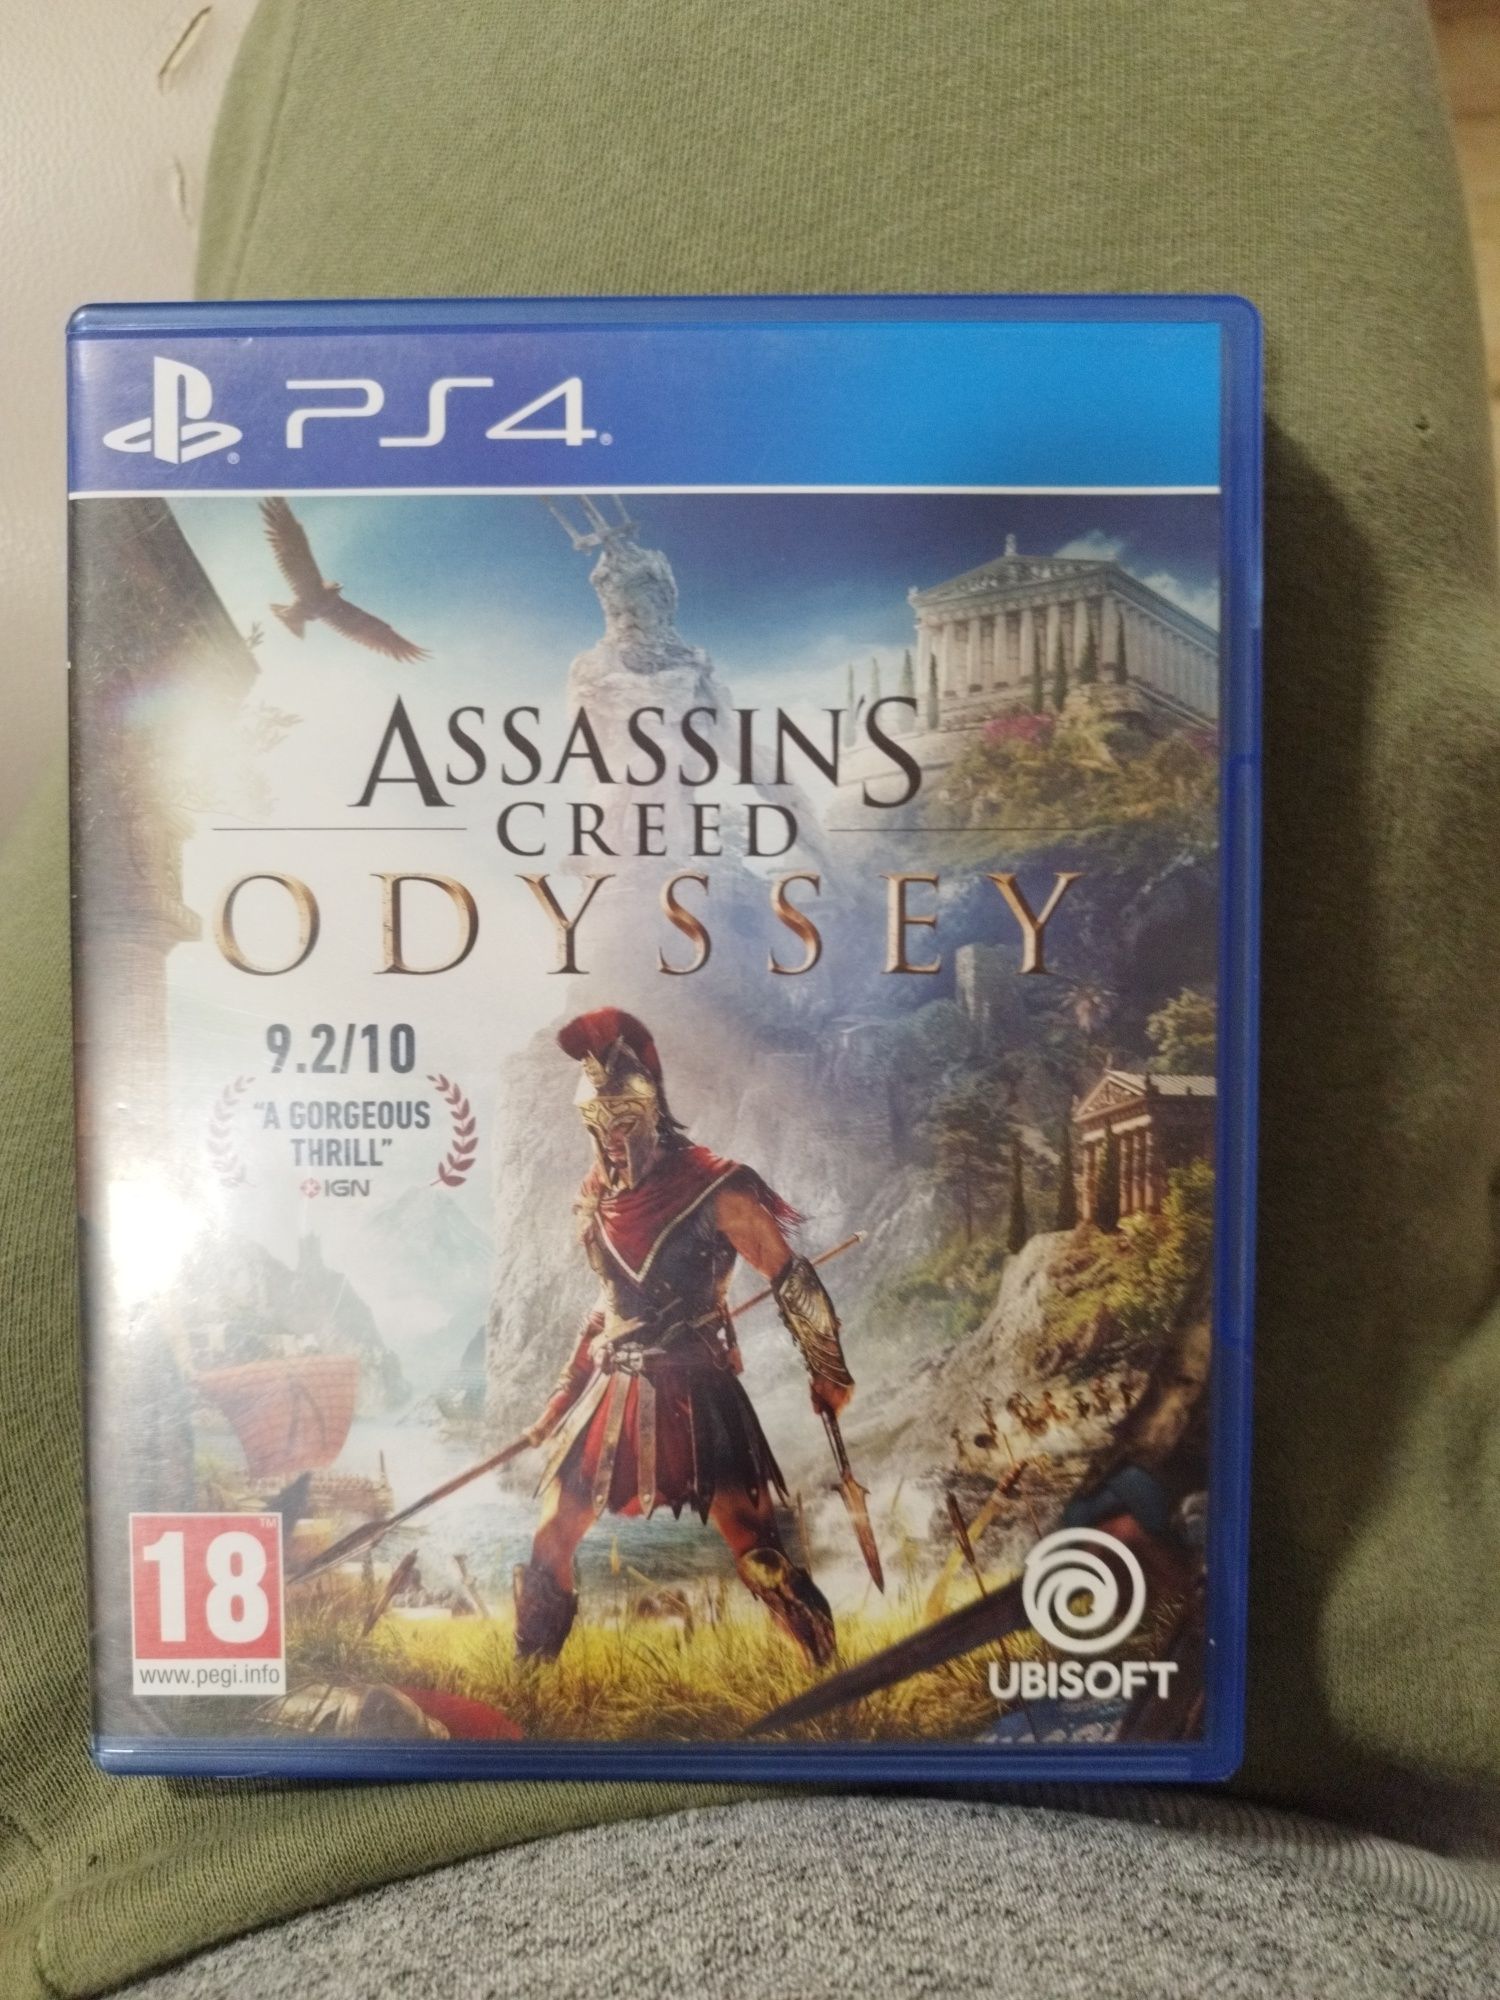 Assassin's creed oddysey și watch dogs 2 pt ps4